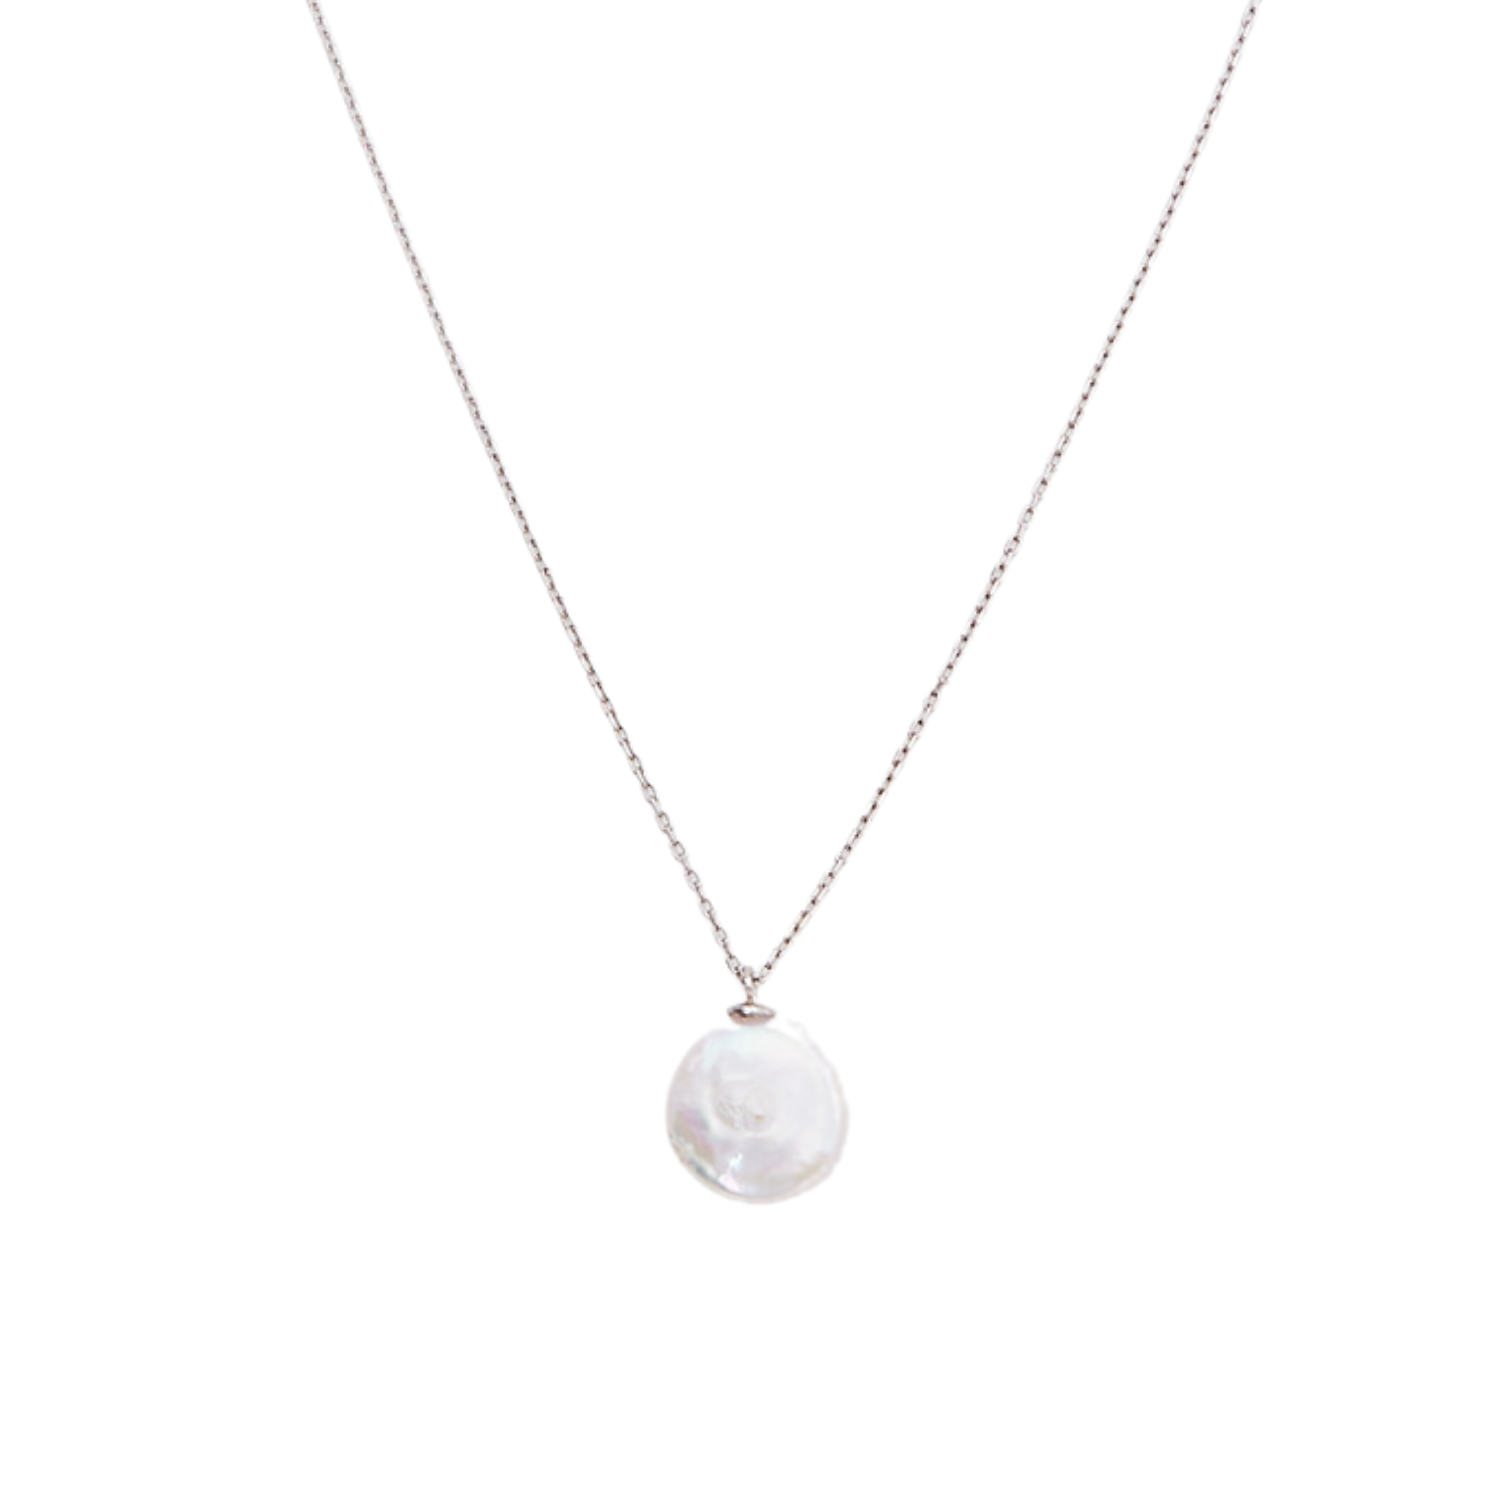 Baroque Flat Pearl Pendant Necklace Sterling Silver